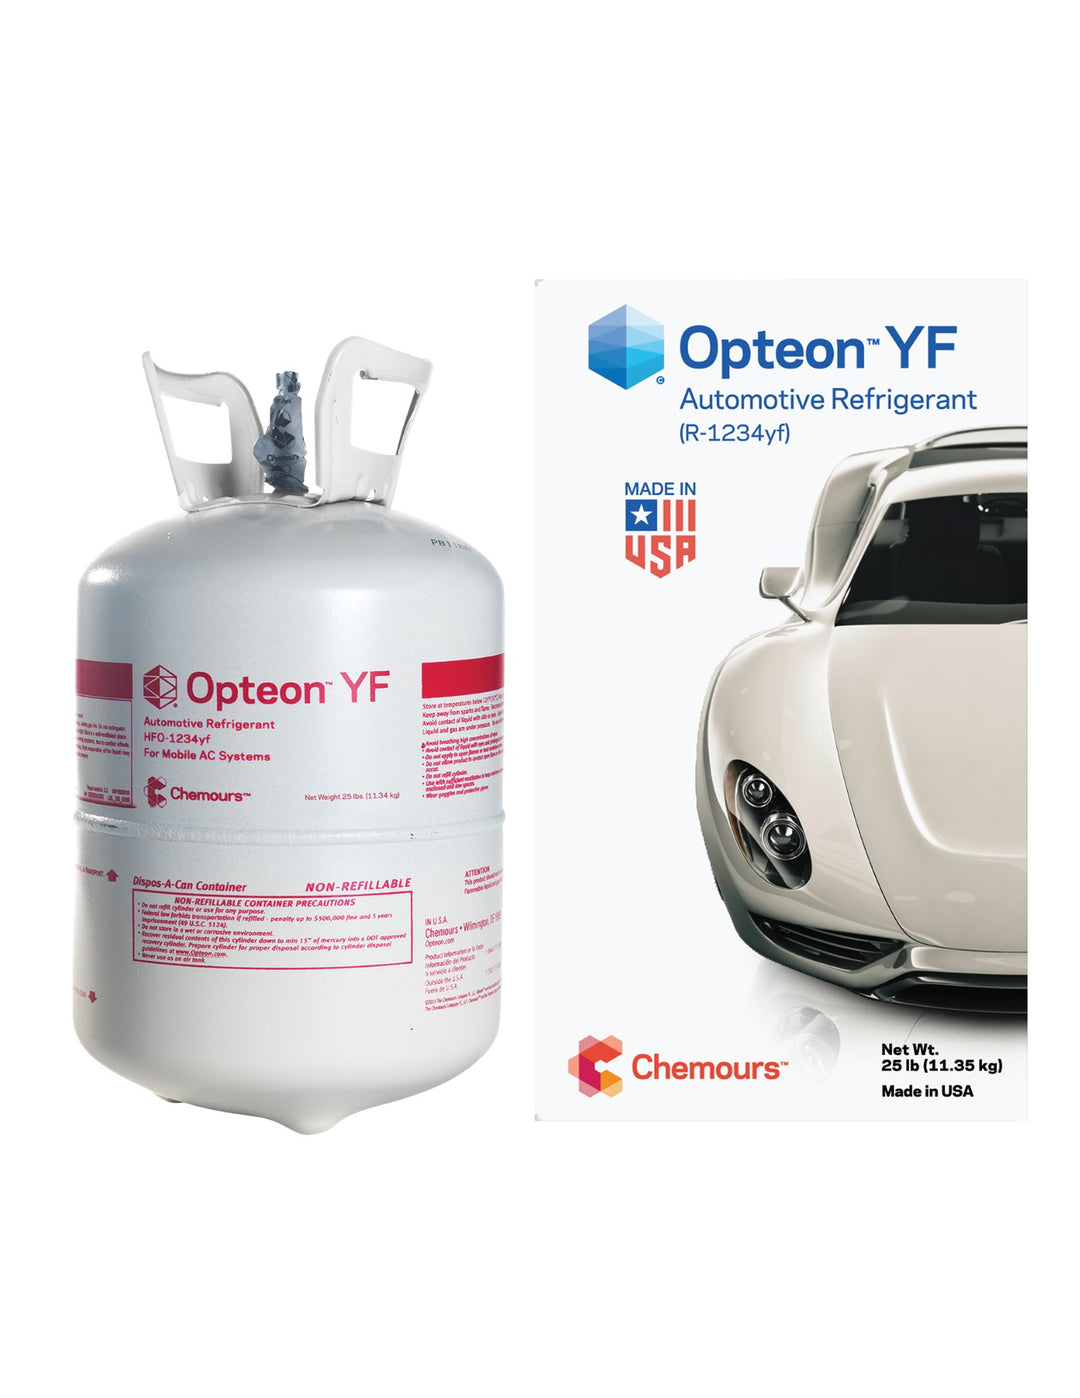 R-1234yf Refrigerant 25lb Cylinder Chemours/Opeton MADE IN USA! BEST PRICE PER OZ!